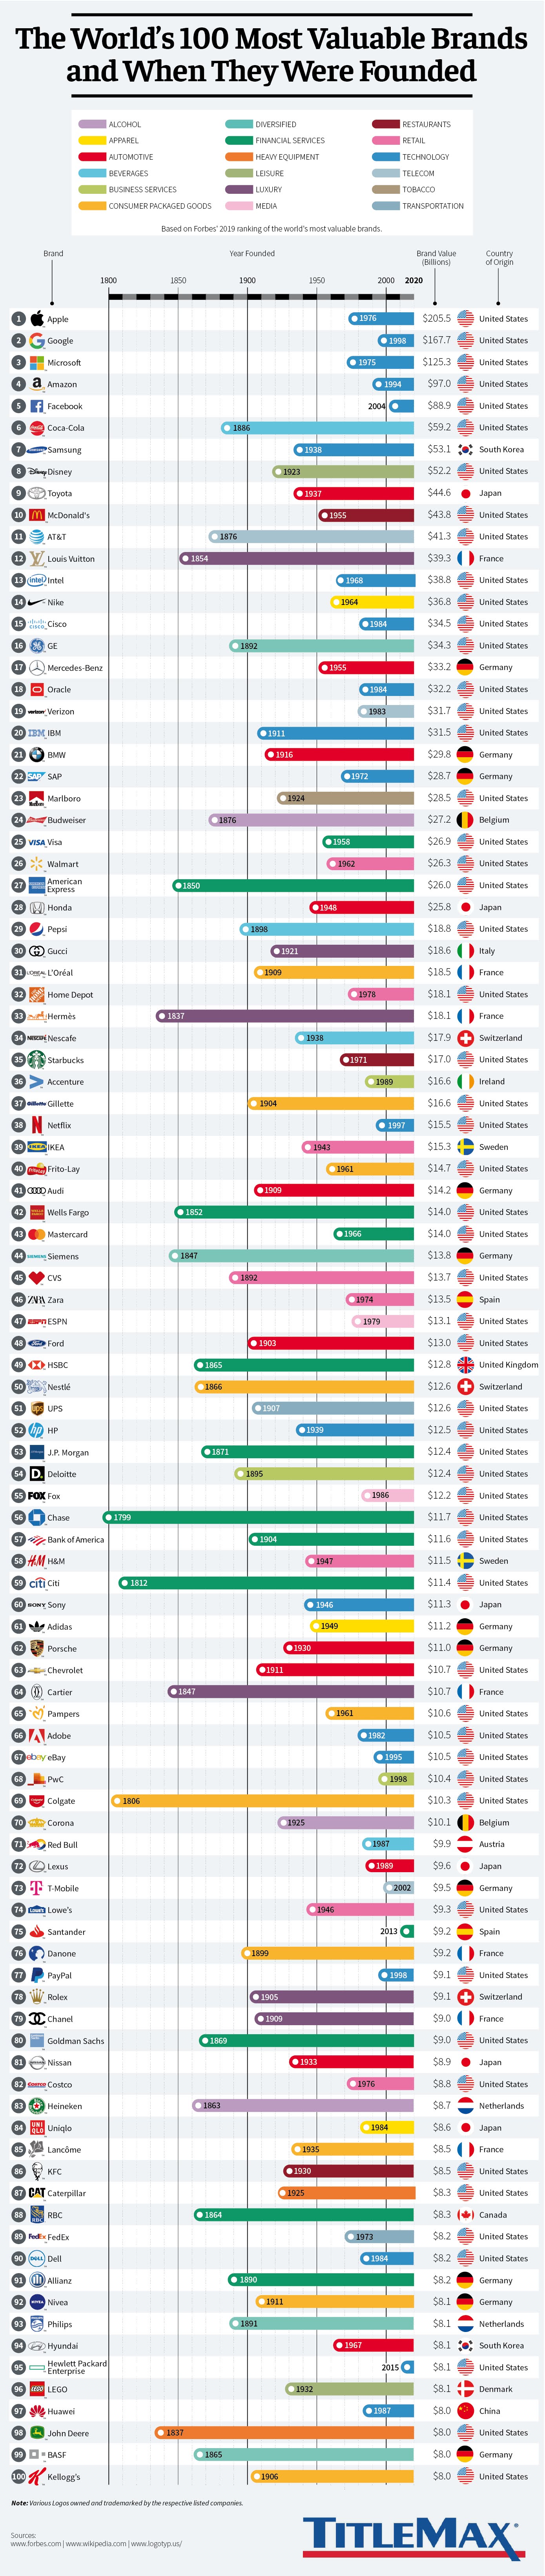 The World’s 100 Most Valuable Brands & When They Were Founded #Infographic